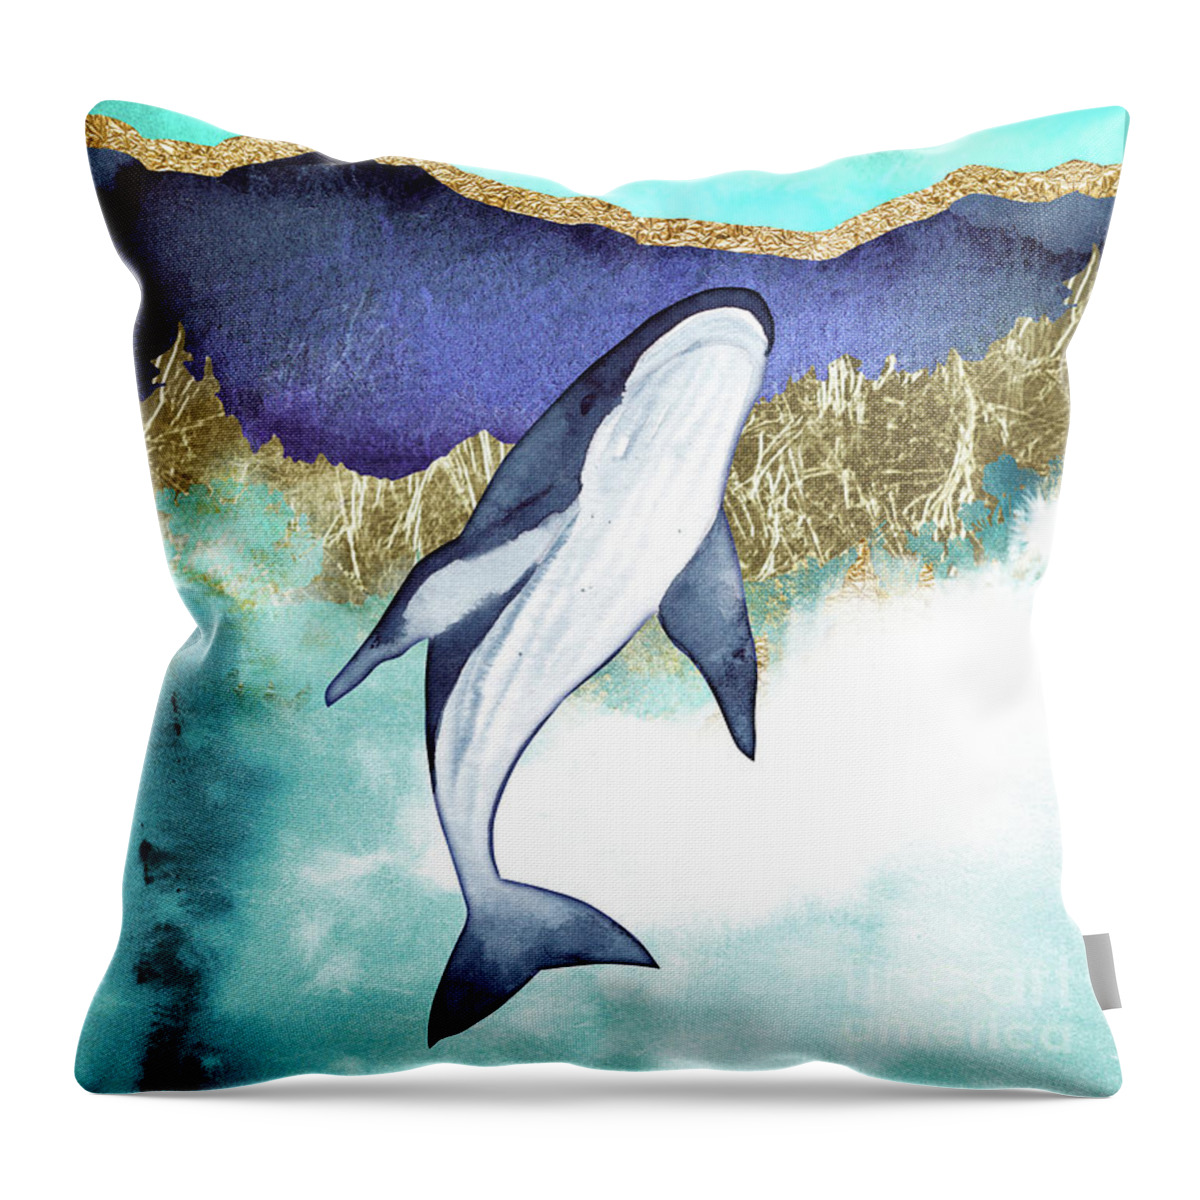 Blue Whale Throw Pillow featuring the painting Whale And Moon by Garden Of Delights